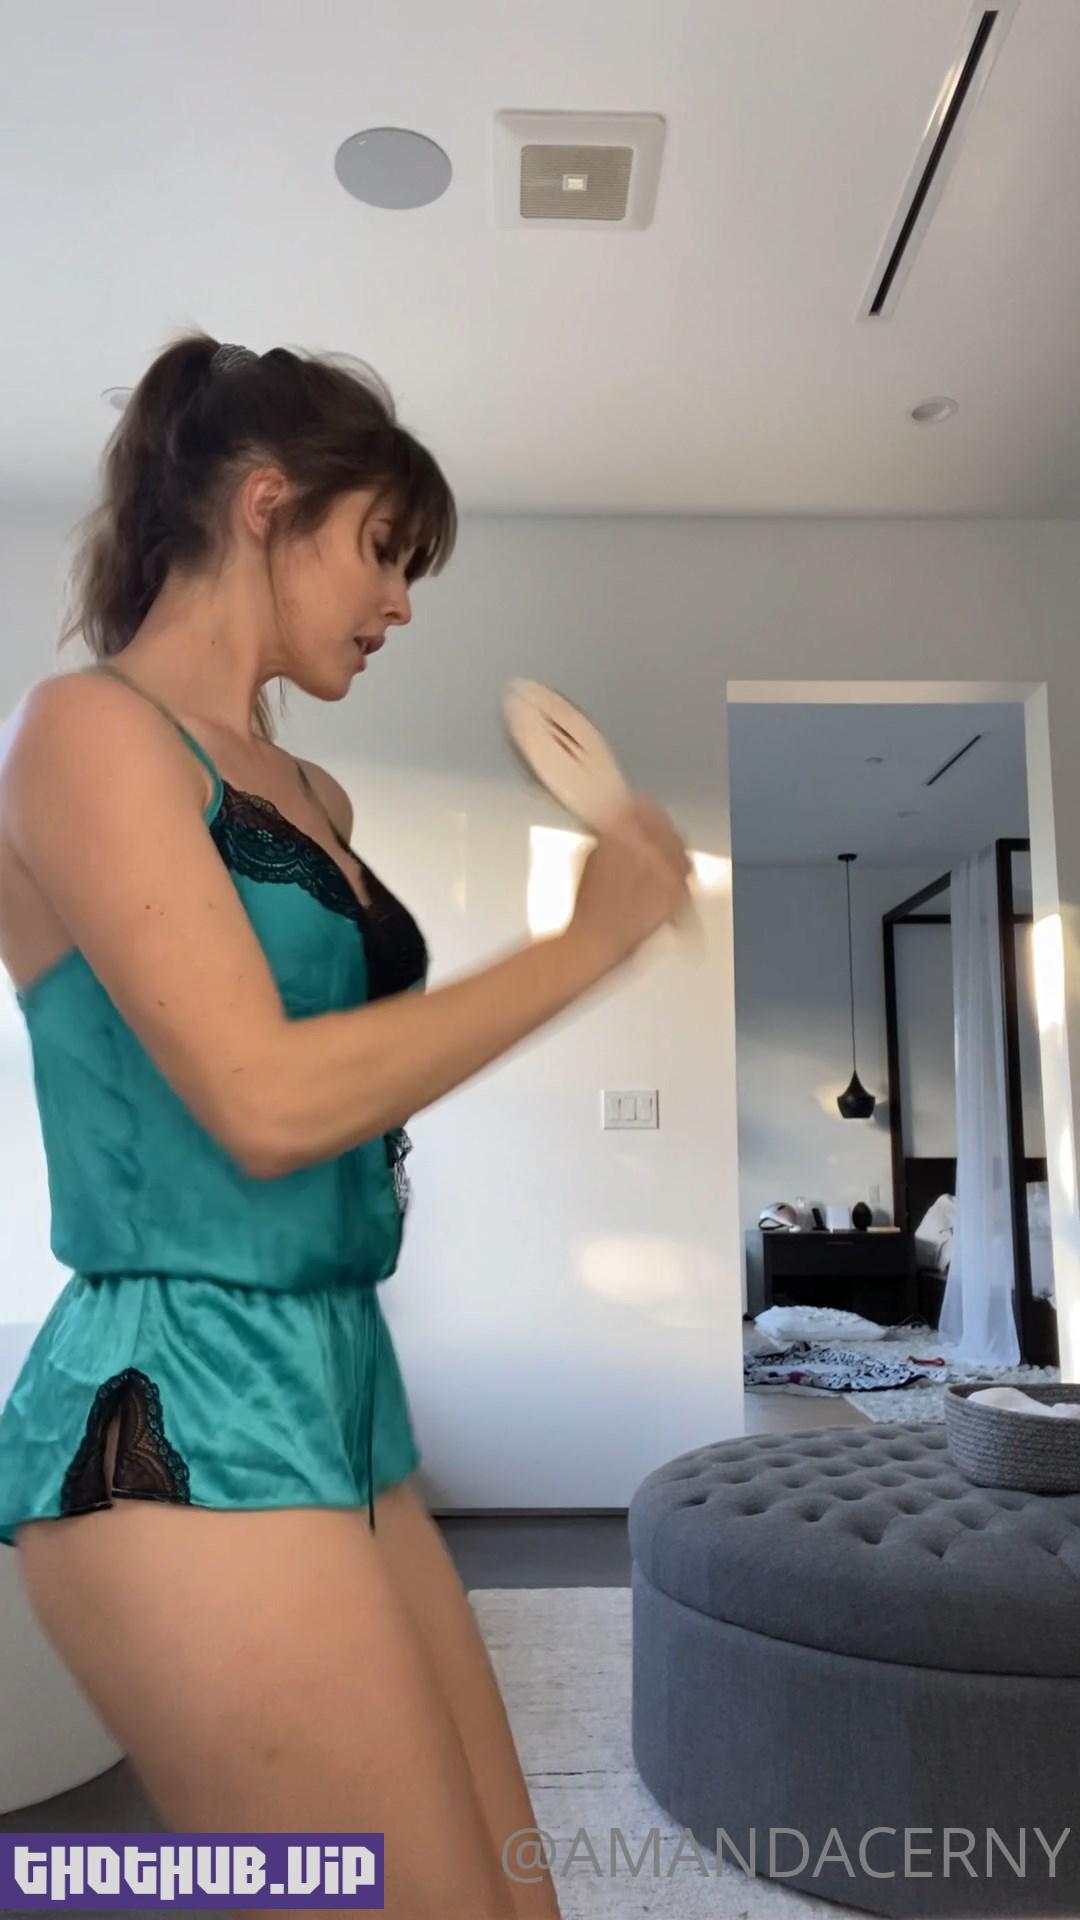 1662453507 377 Amanda Cerny Camisole Dance OnlyFans Video Leaked